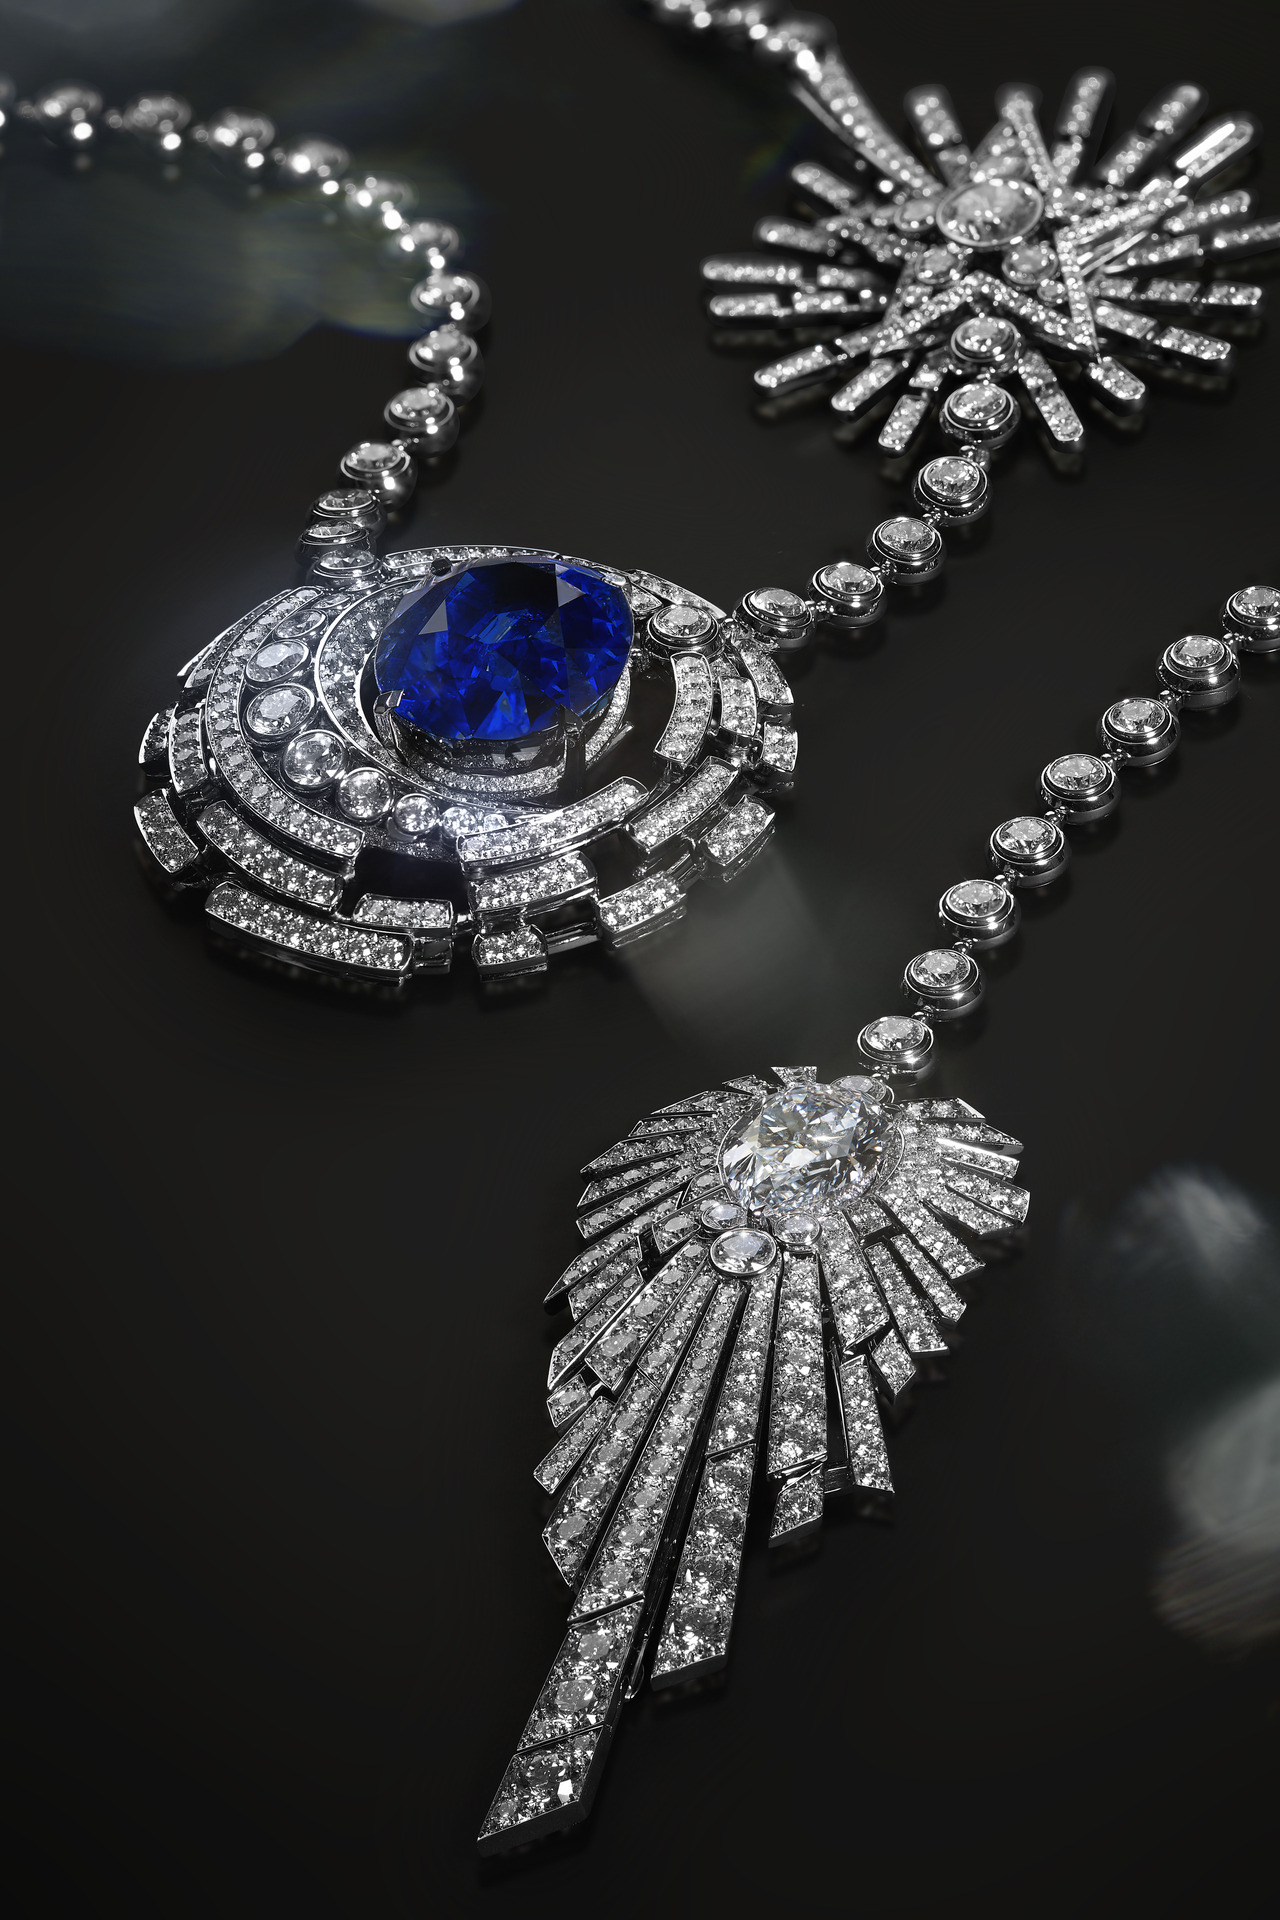 A Milestone Year: Chanel Celebrates with the 1932 High Jewellery